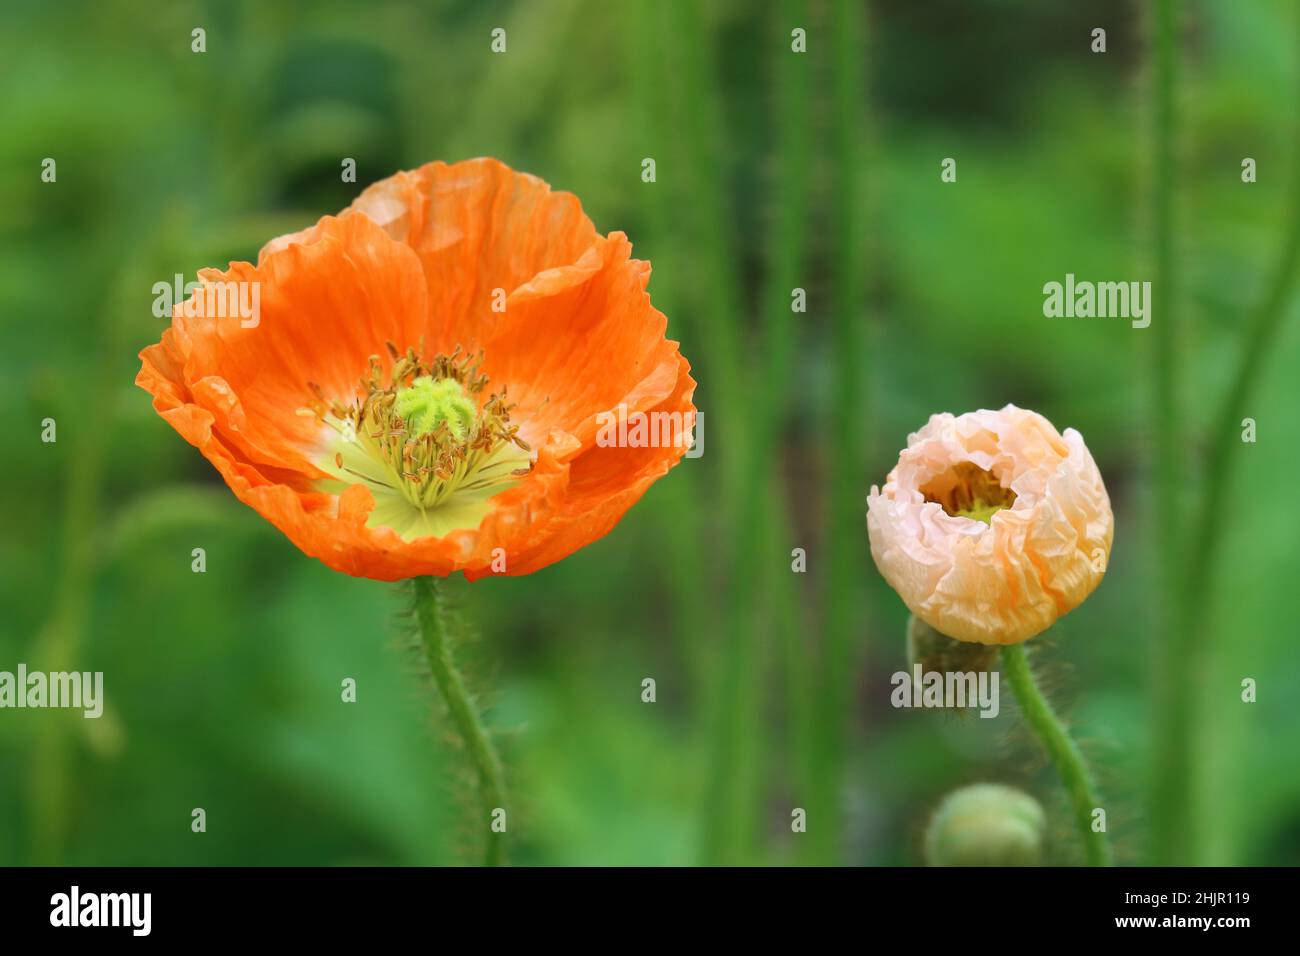 close-up of two fresh poppies against a green blurry background Stock Photo